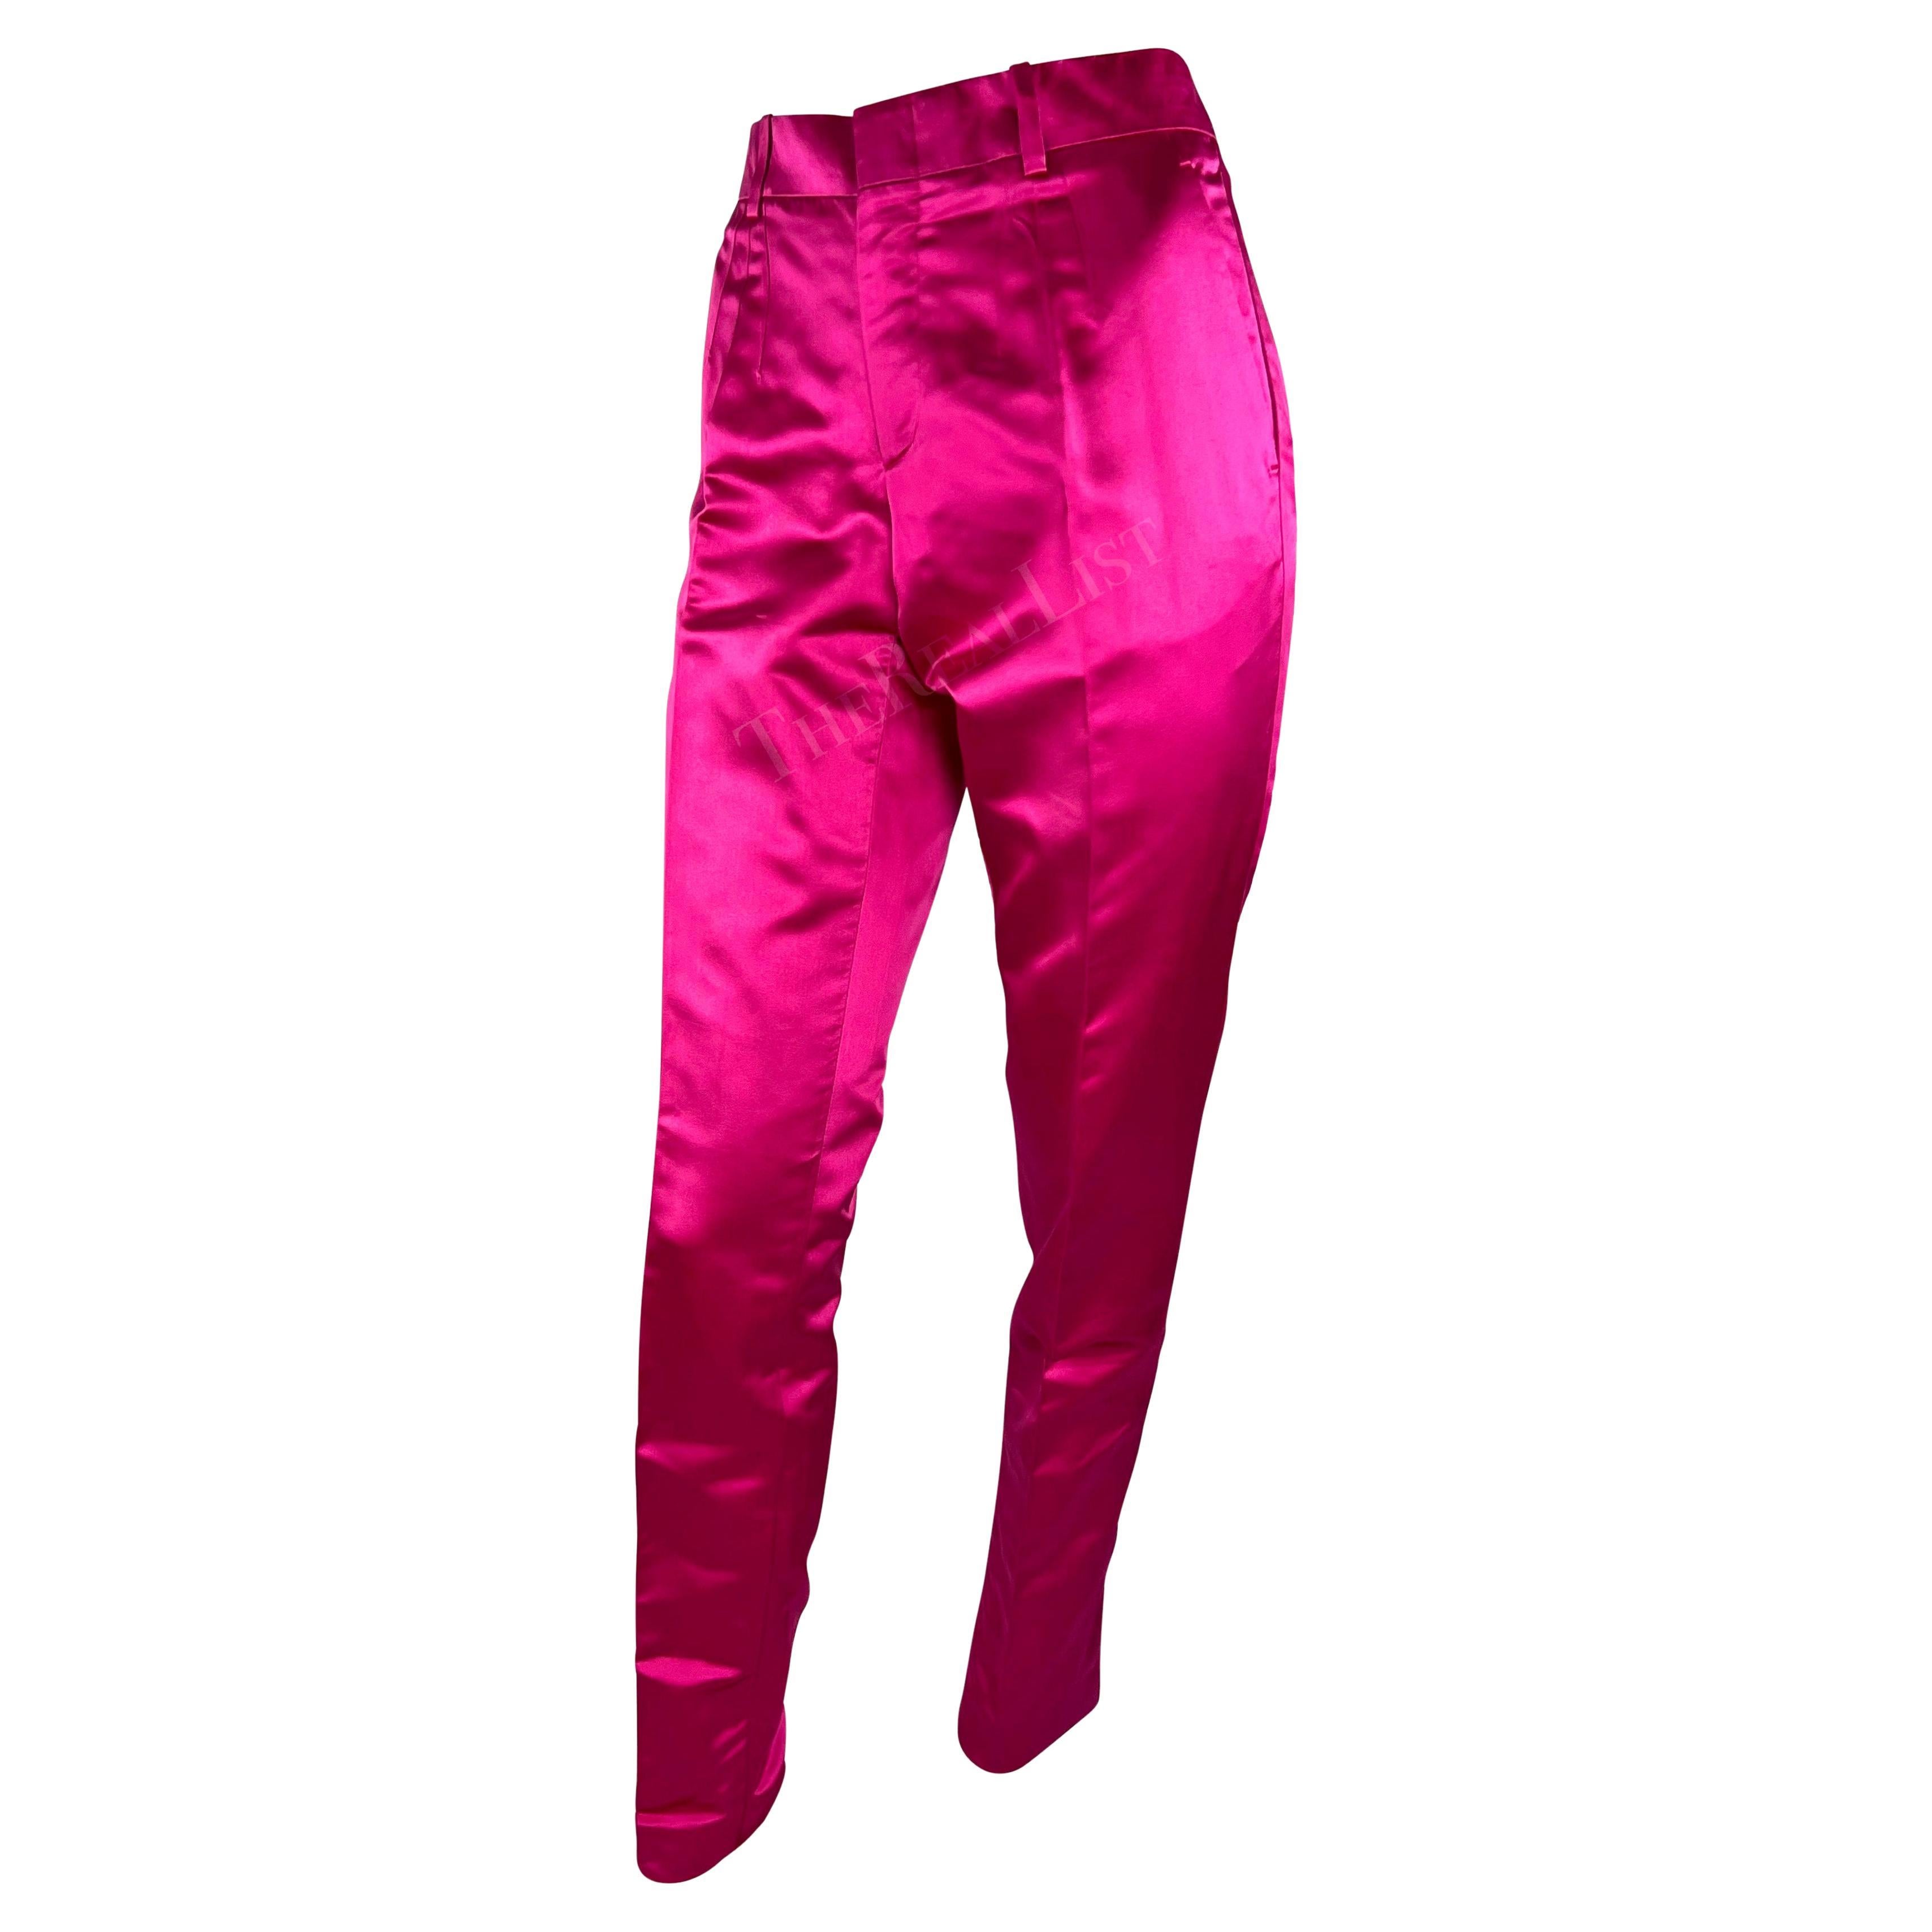 Women's S/S 2001 Gucci by Tom Ford Runway Hot Pink Satin Silk Blend Tapered Pants For Sale